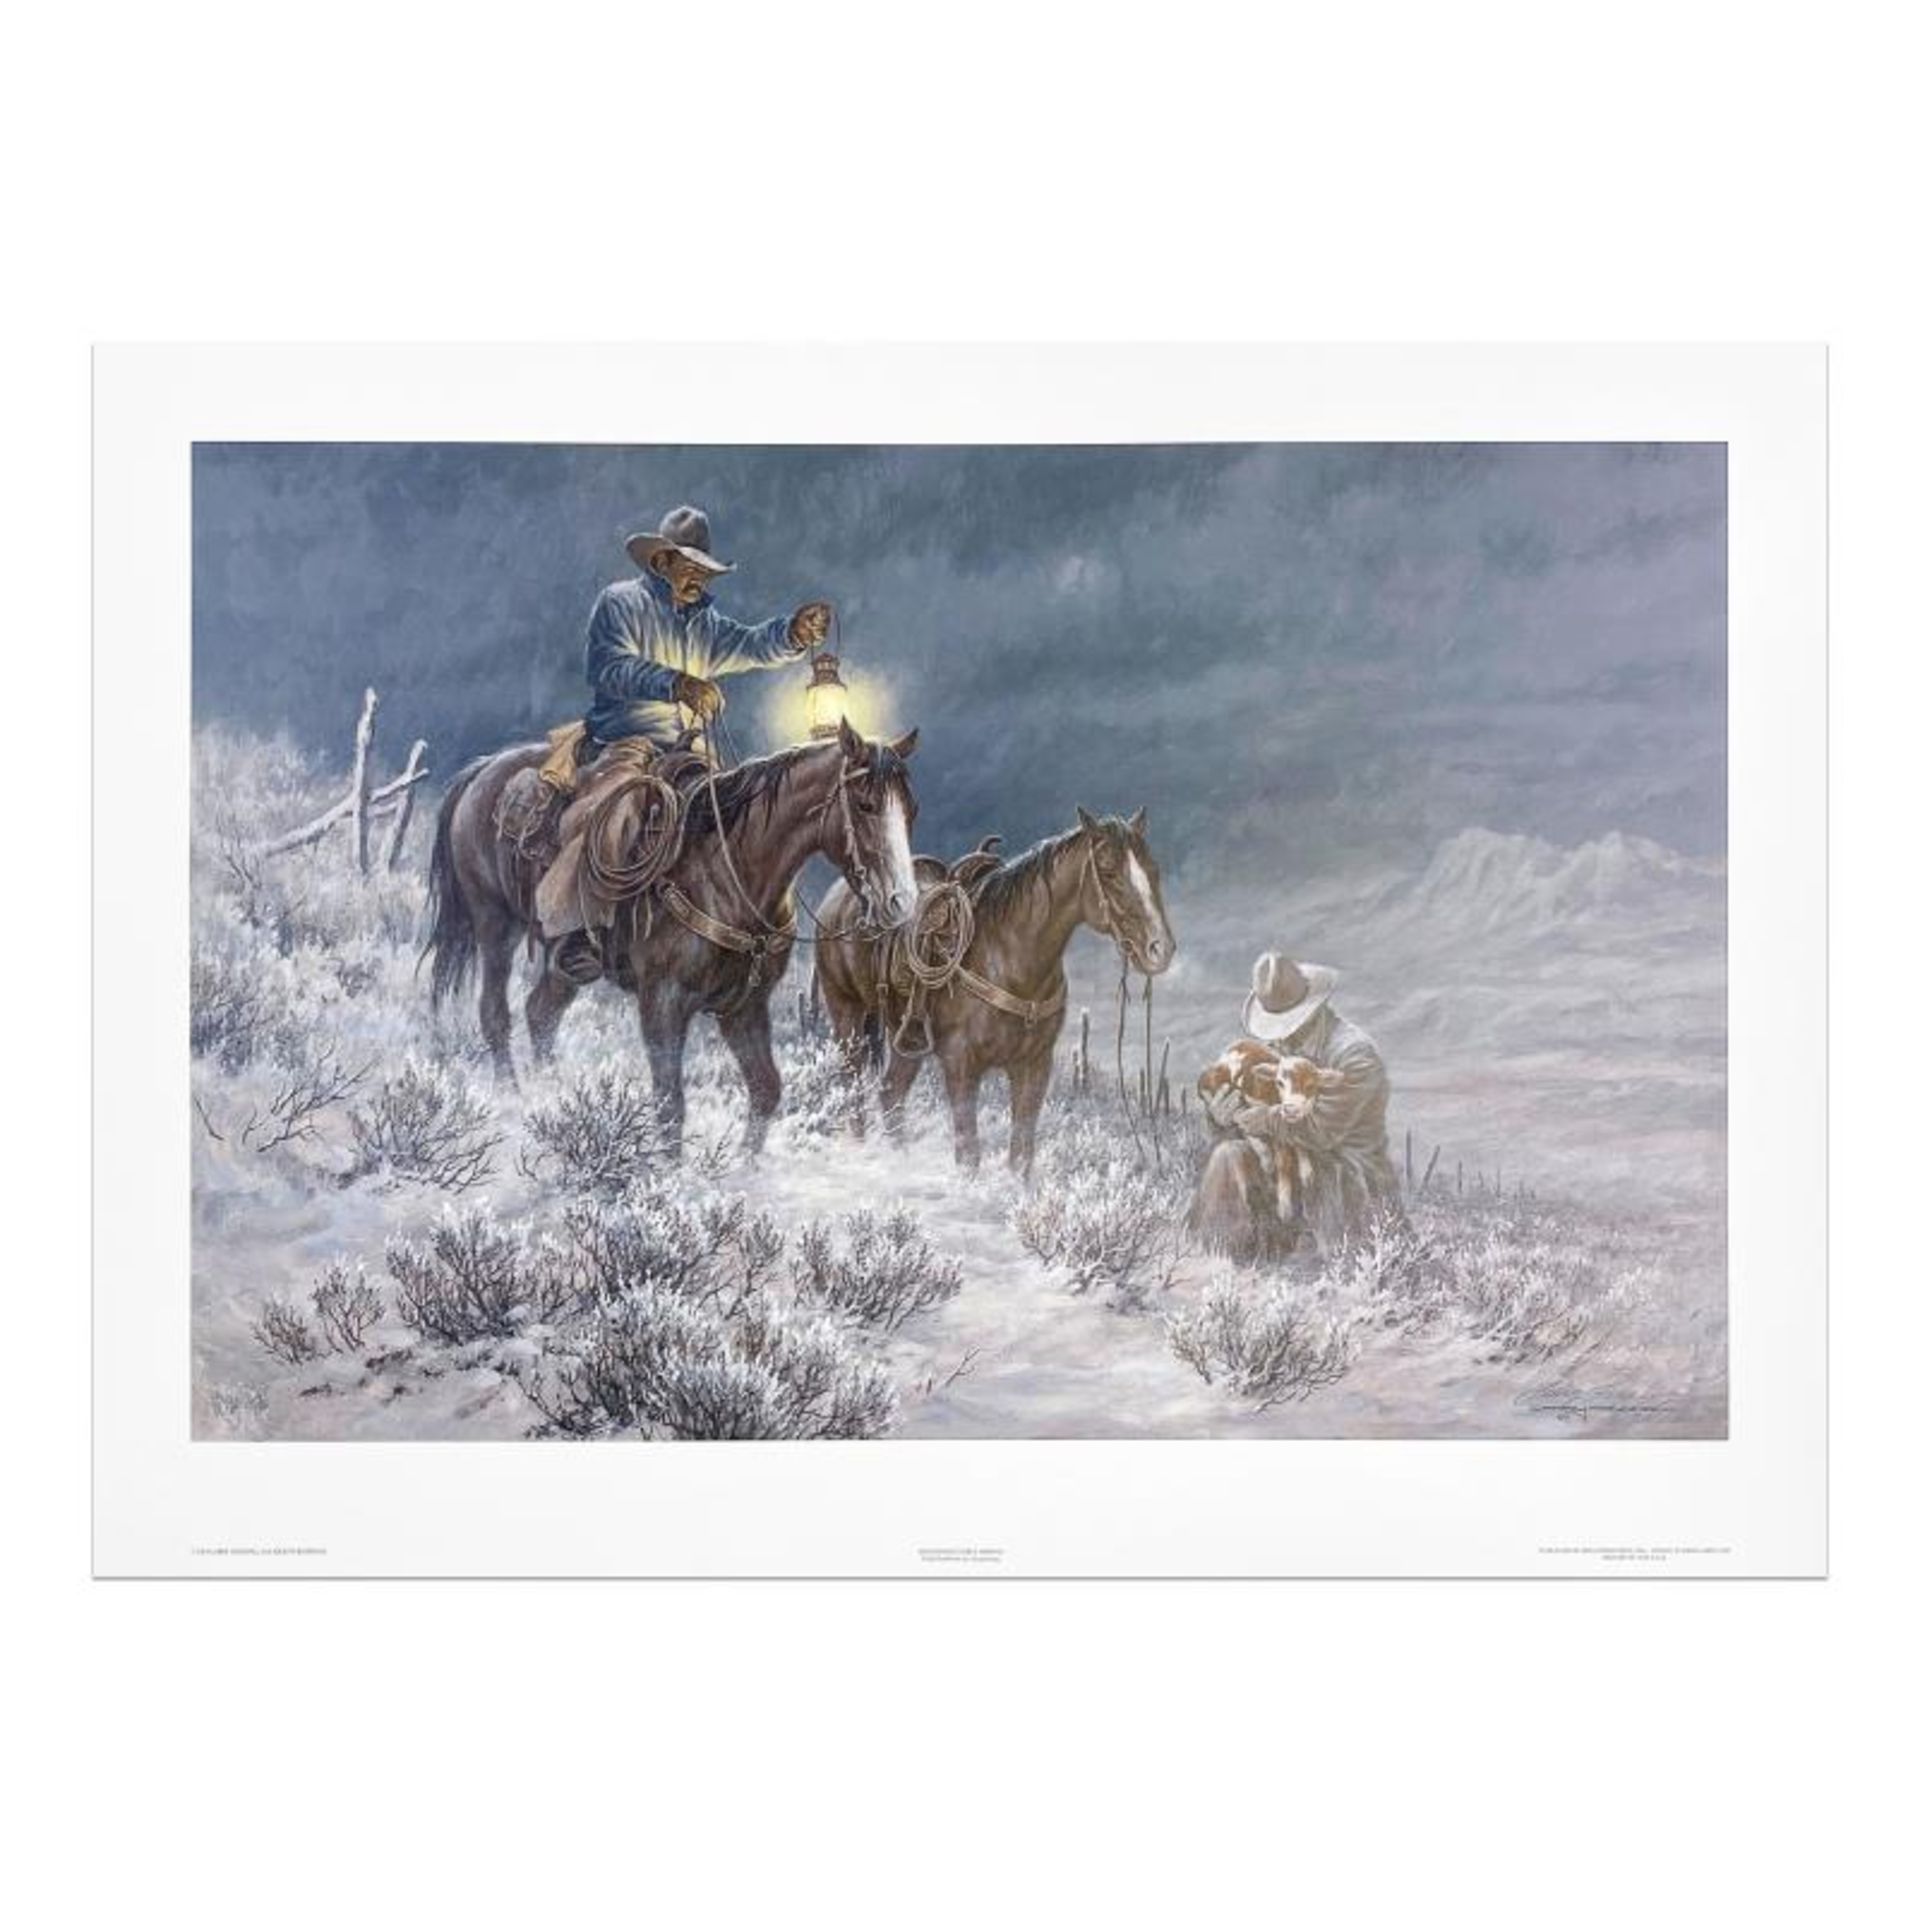 Larry Fanning (1938-2014), "High Range Early Arrival" Limited Edition Lithograph